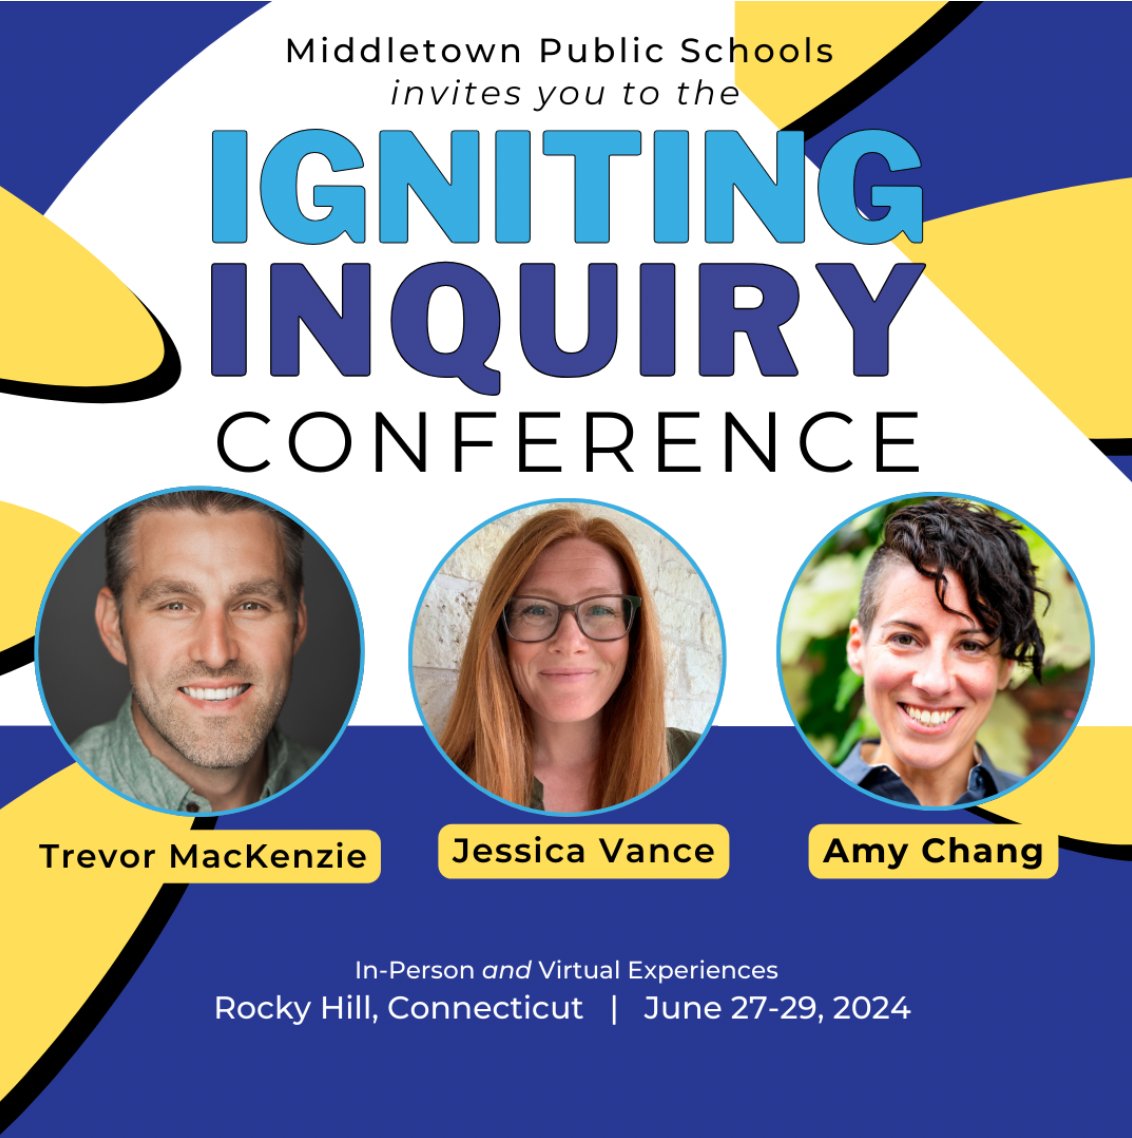 Igniting Inquiry is around the corner and we would love to have you join us either face to face or virtually. All the details can be found here... sites.google.com/mpsct.org/igni…